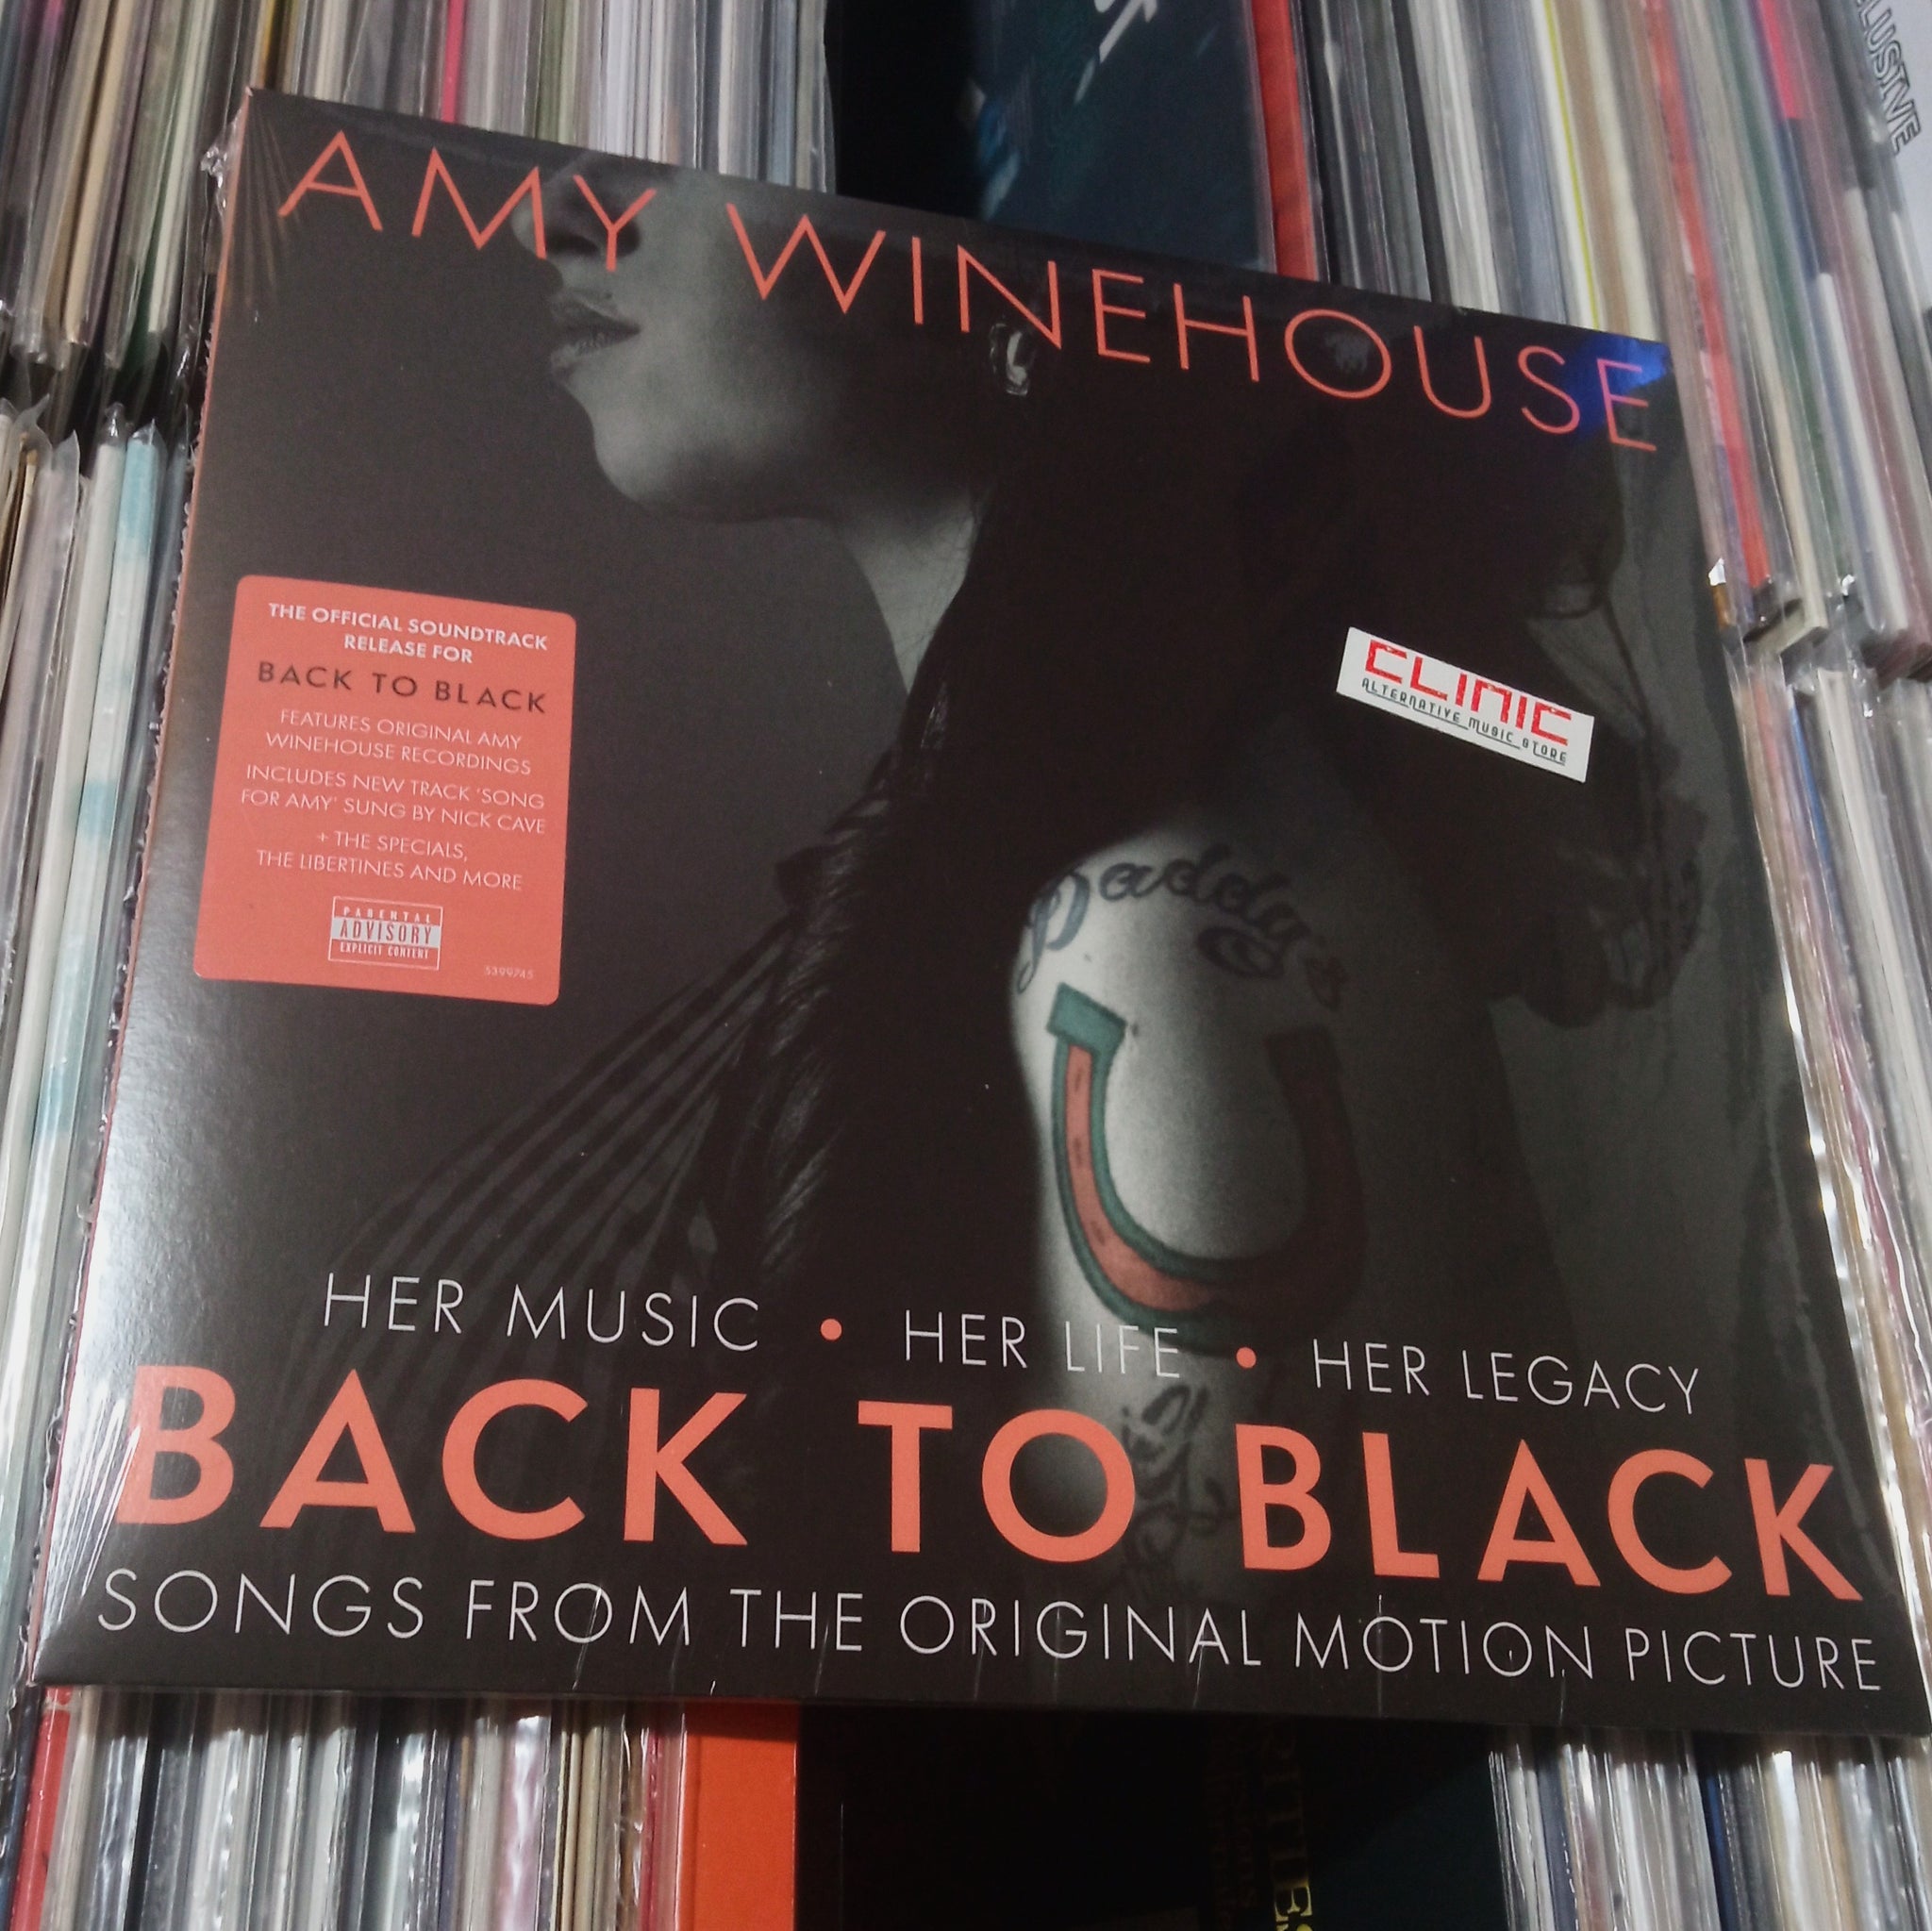 LP - AMY WINEHOUSE - BACK TO BLACK - SONGS FROM THE ORIGINAL MOTION PICTURE